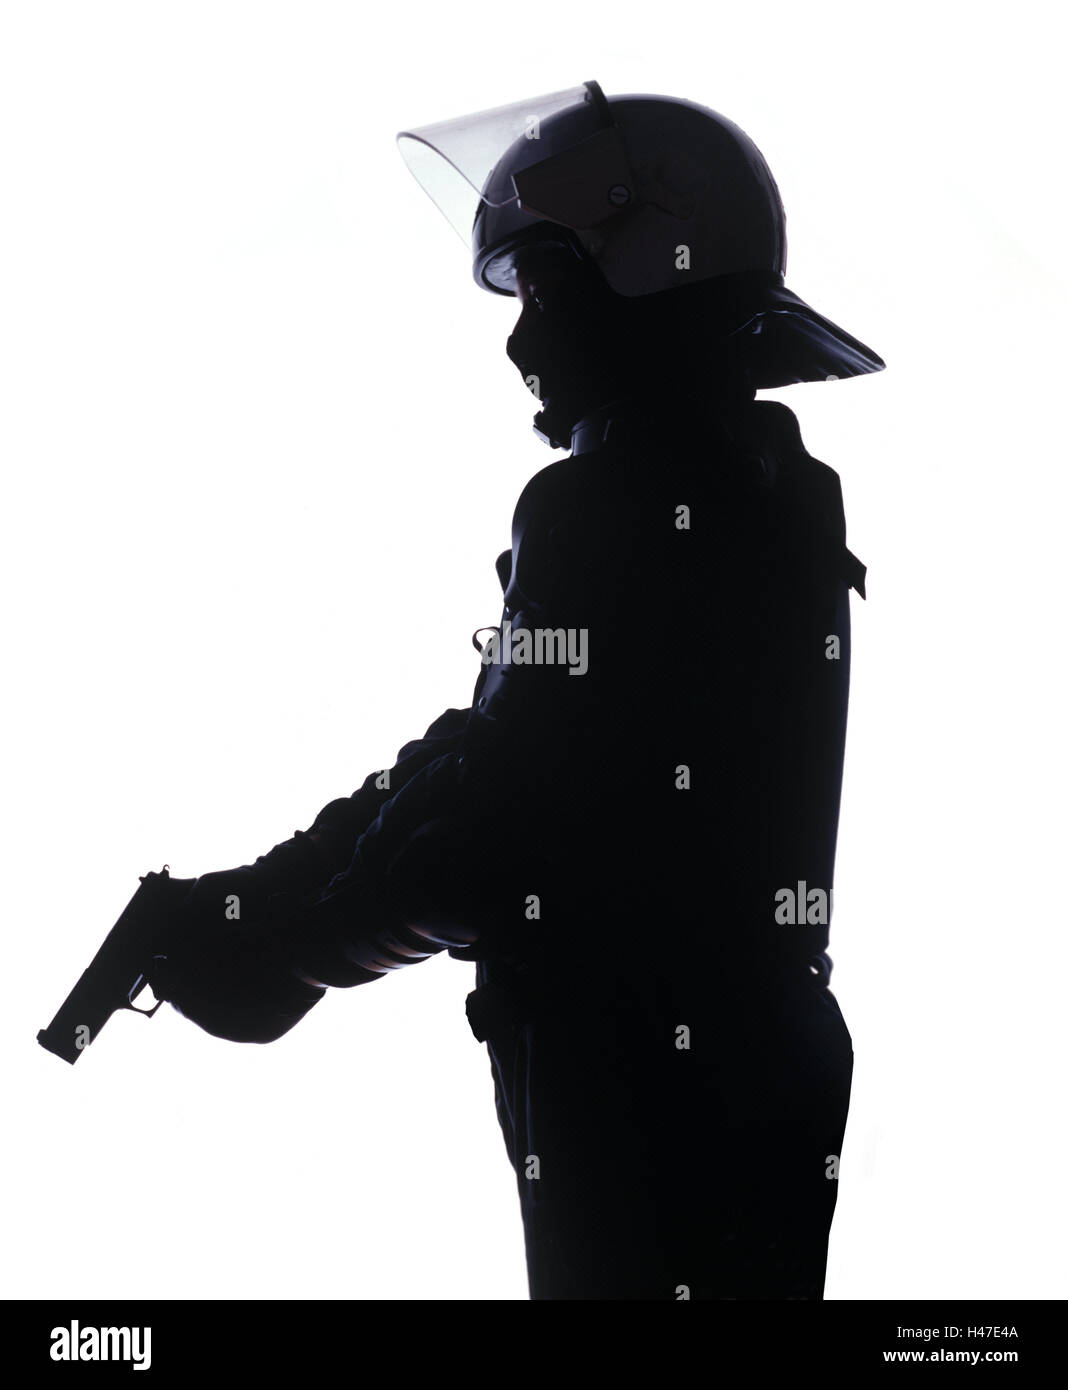 Policeman, protective clothing, gun, shooting practise, half portrait, side view, silhouette, police, occupation, man, official, police officer, uniform, protective clothing, protection, helmet, mask, protective mask, gun, SEK, MEK, GSG9, special task force, special unit, weapon, firearm, gun, counter-terrorism, Stock Photo